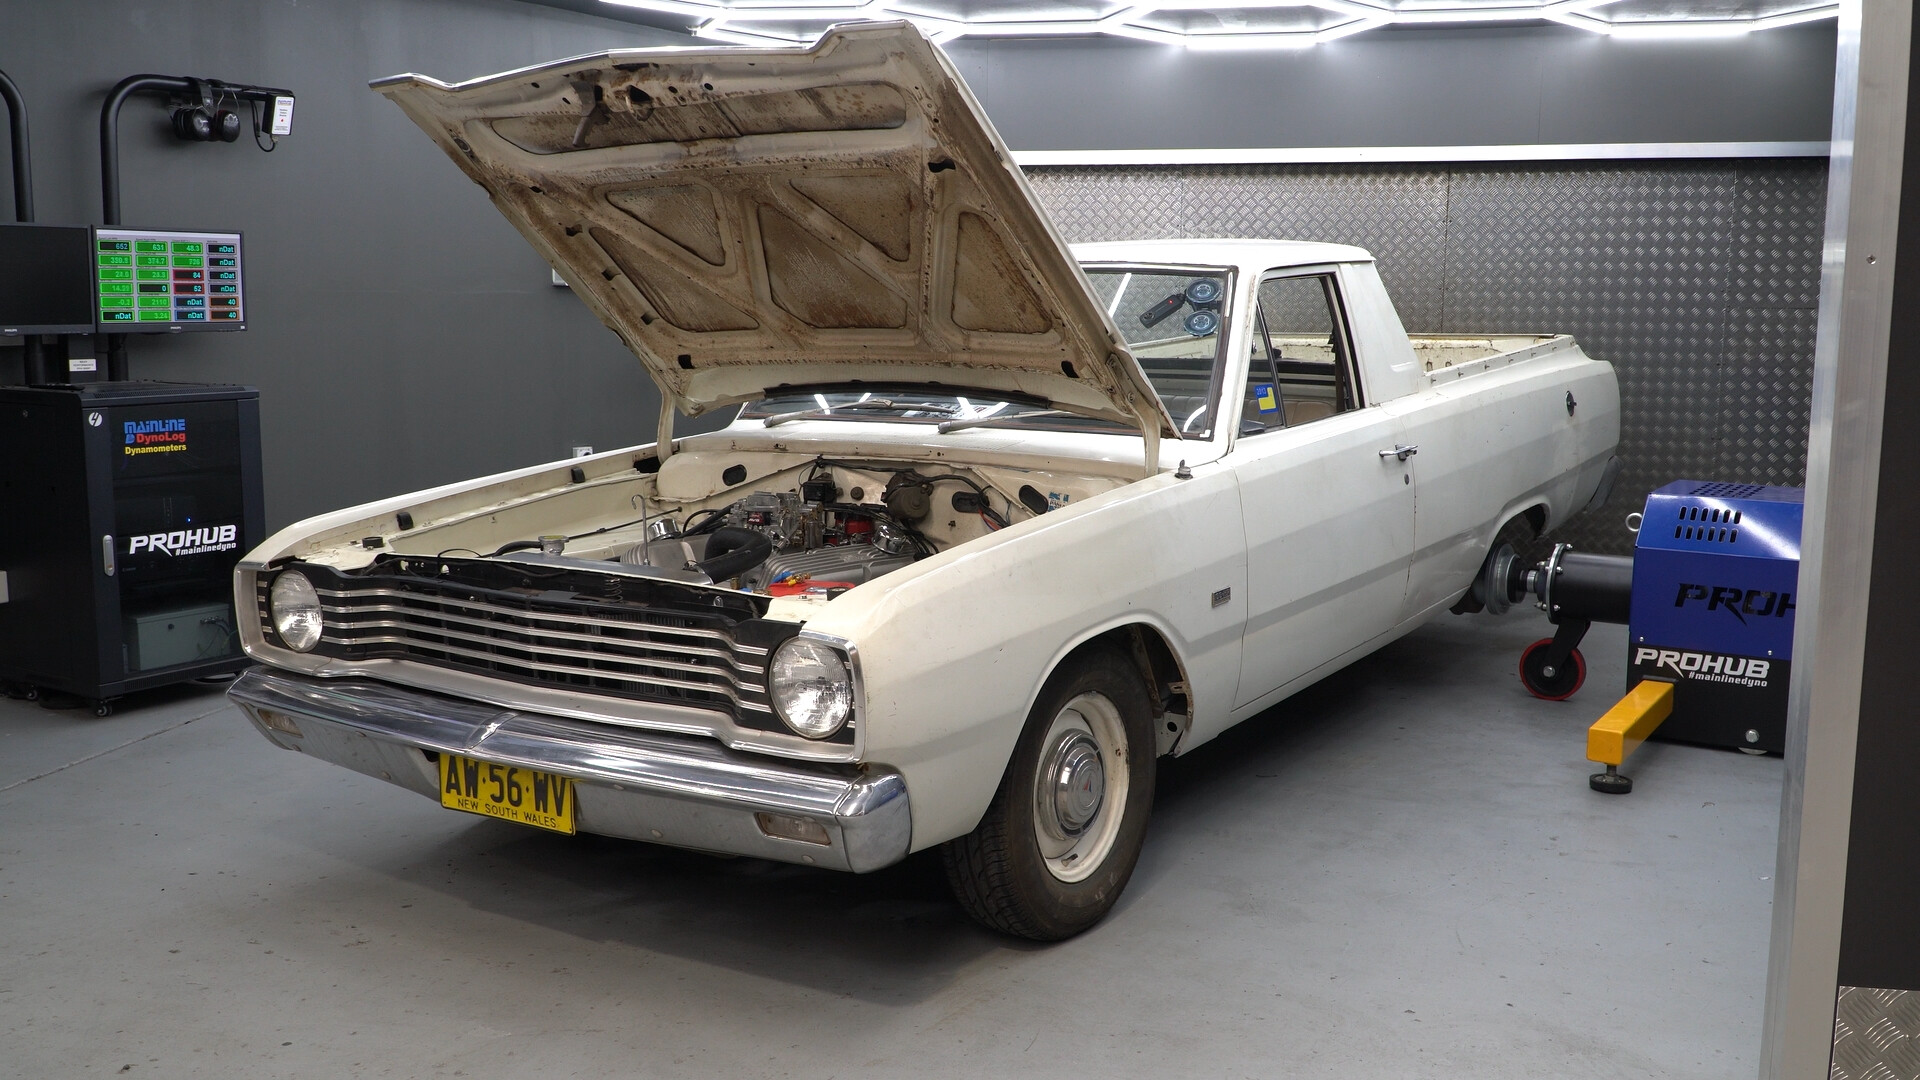 Video: The Valiant ute goes on the dyno!